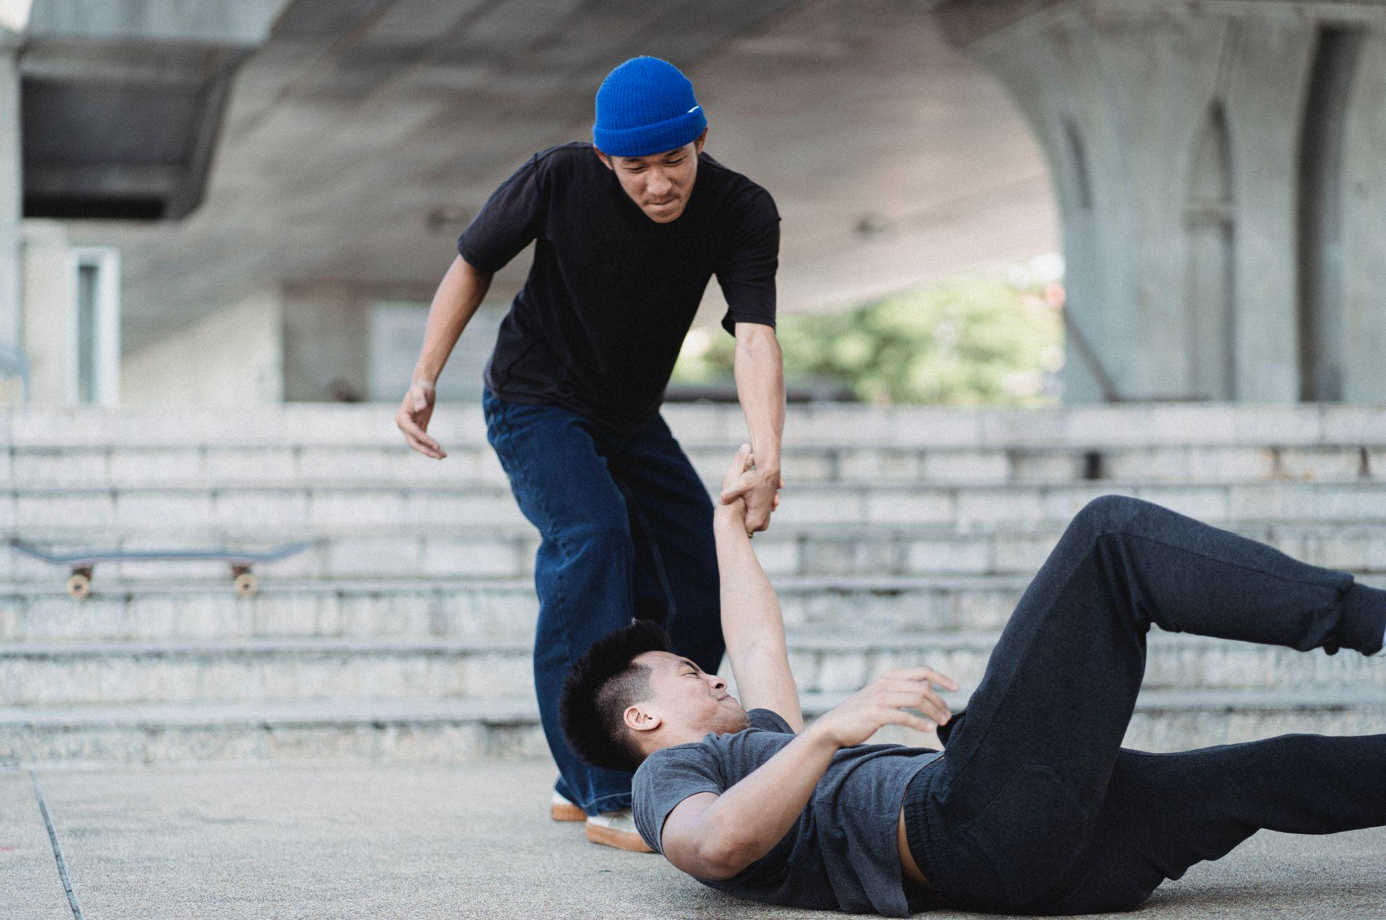 Young Asian man helping friend get up from pavement; image by Allan Mas, via Pexels.com.